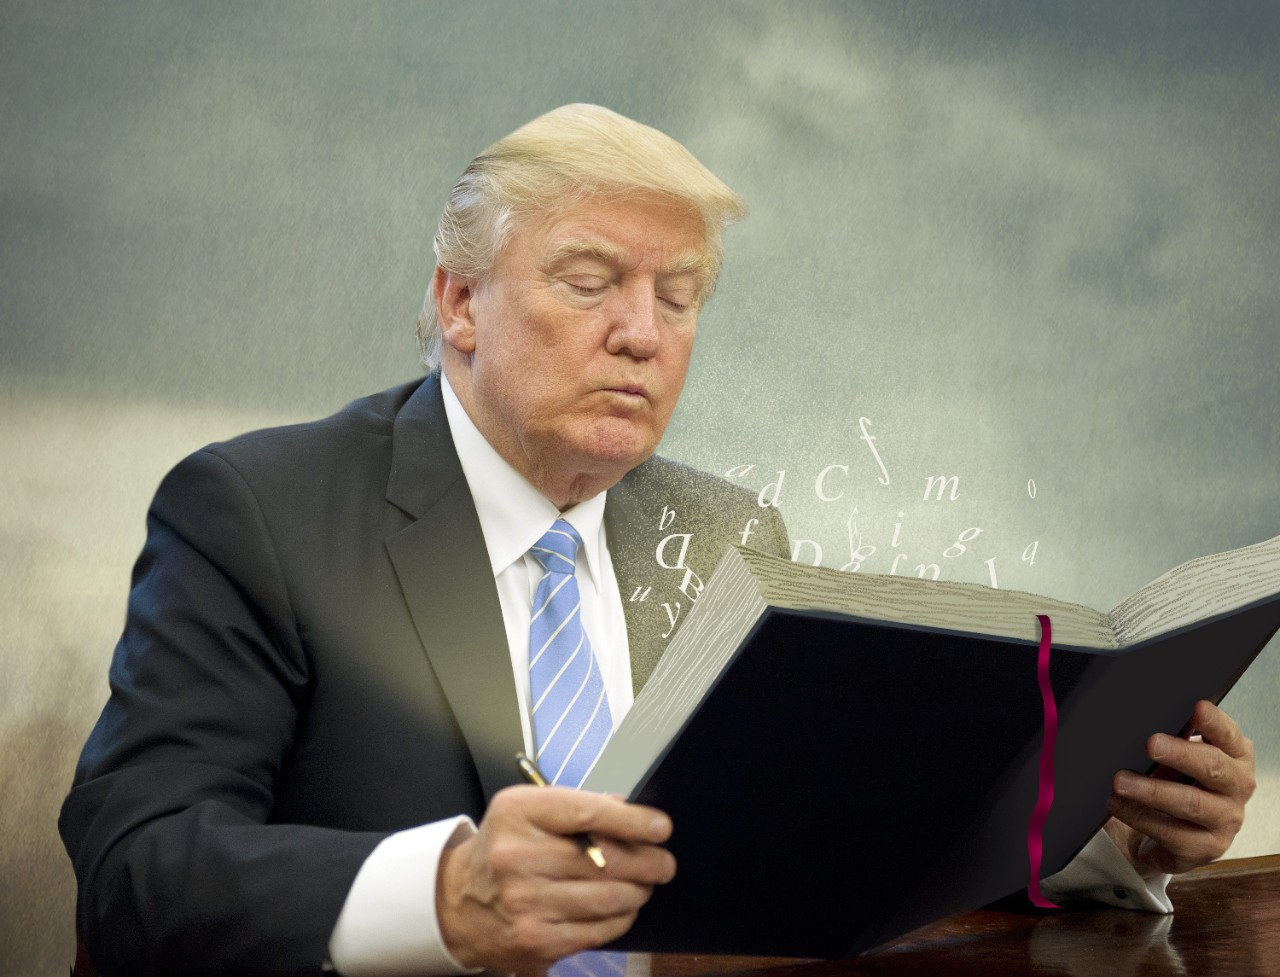 Donald Trump tries to read a book.